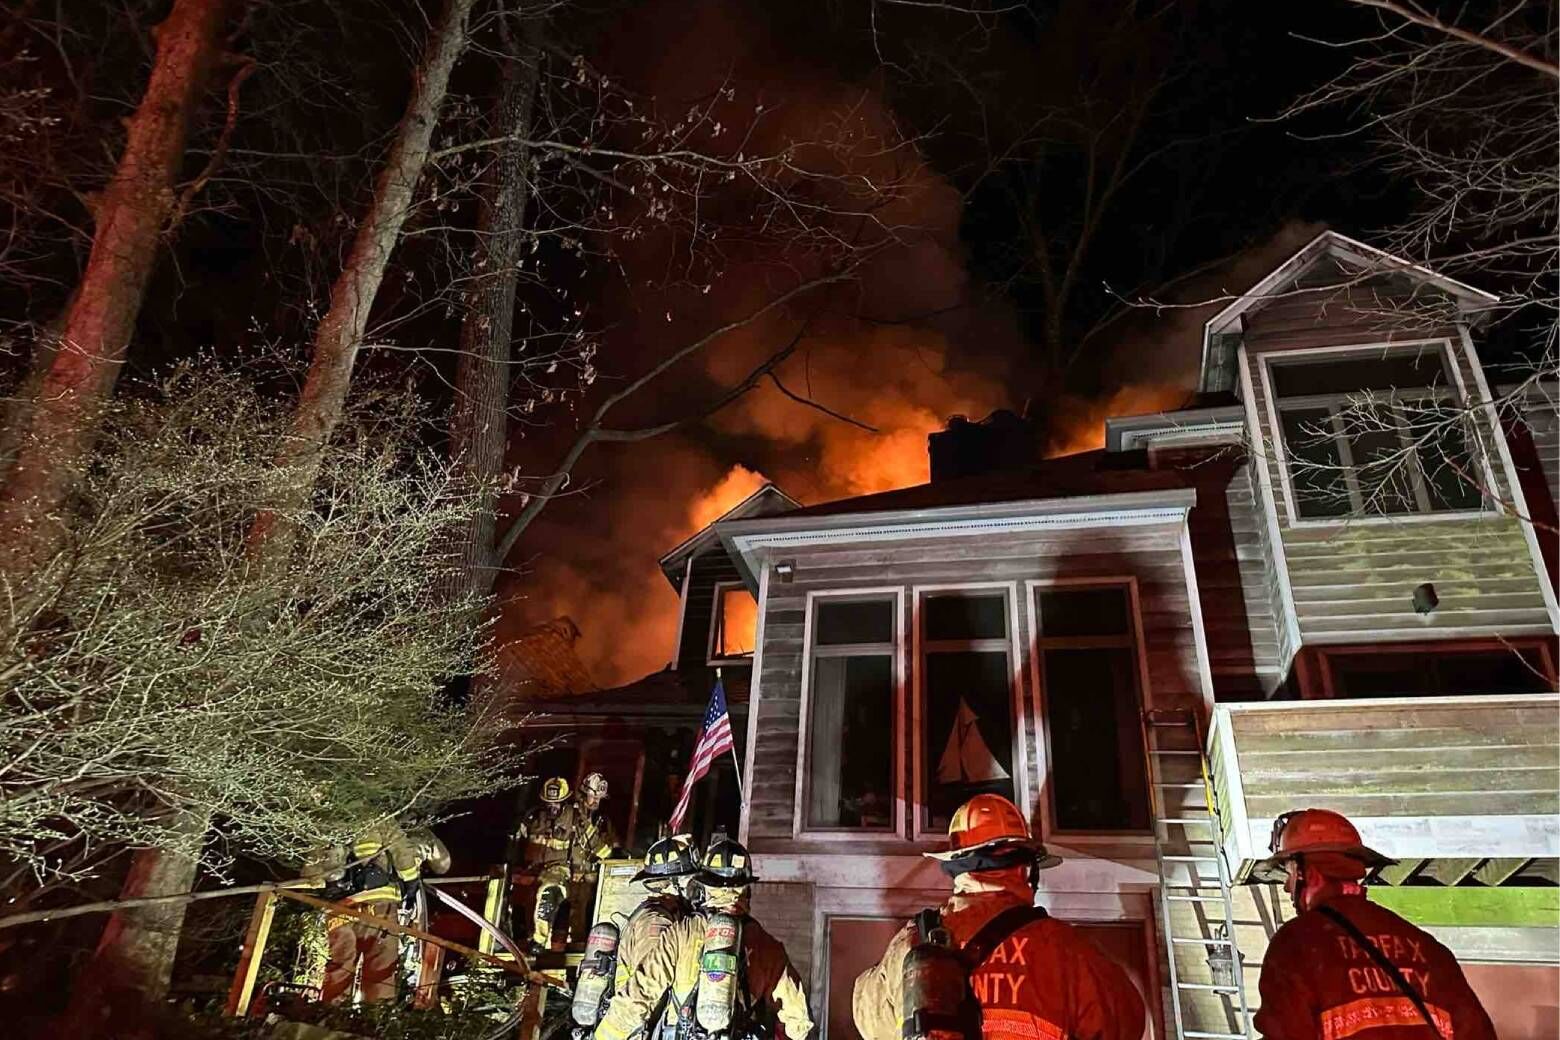 Officials in Fairfax County, Virginia, say they are responding to a house fire  in the Wakefield area. (Courtesy Fairfax County Fire and Rescue Department)